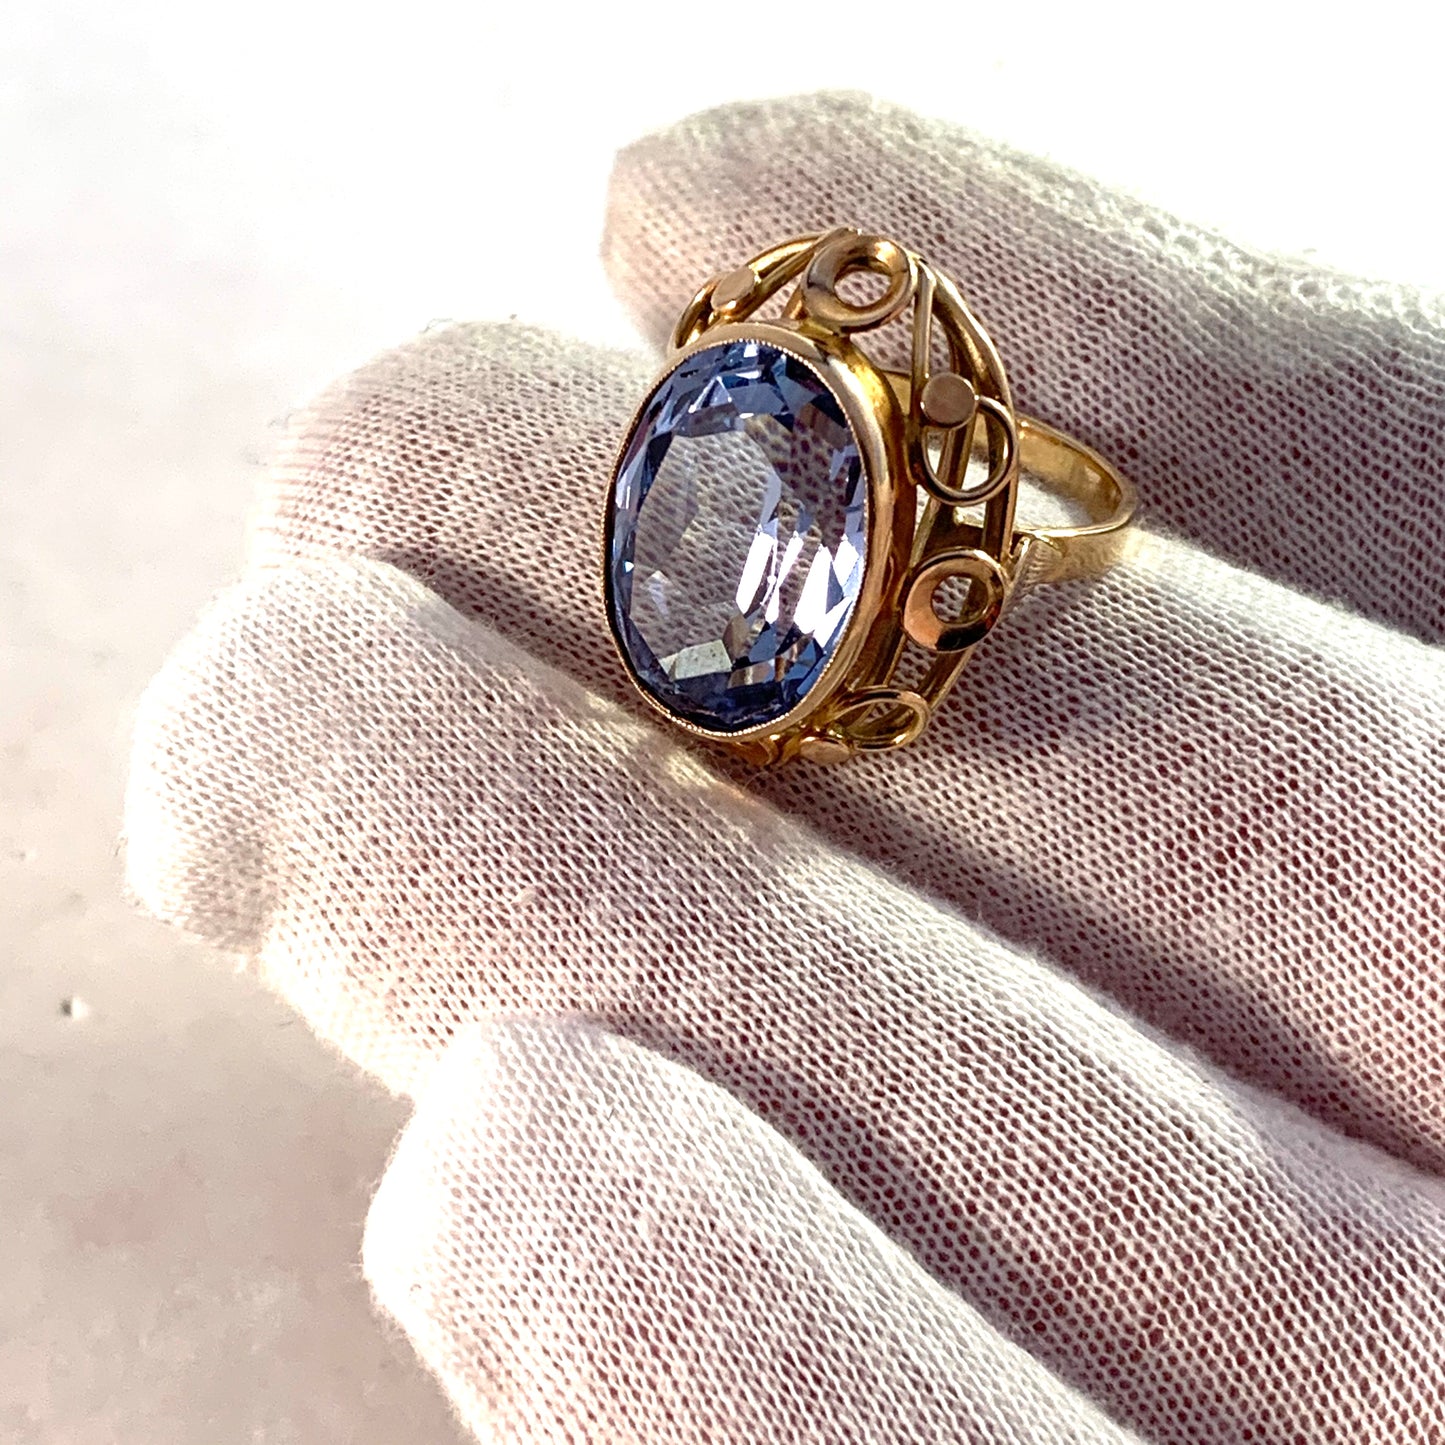 Eastern Europe 1940-50s Mid Century 14k Gold Synthetic Spinel Cocktail Dinner Ring.